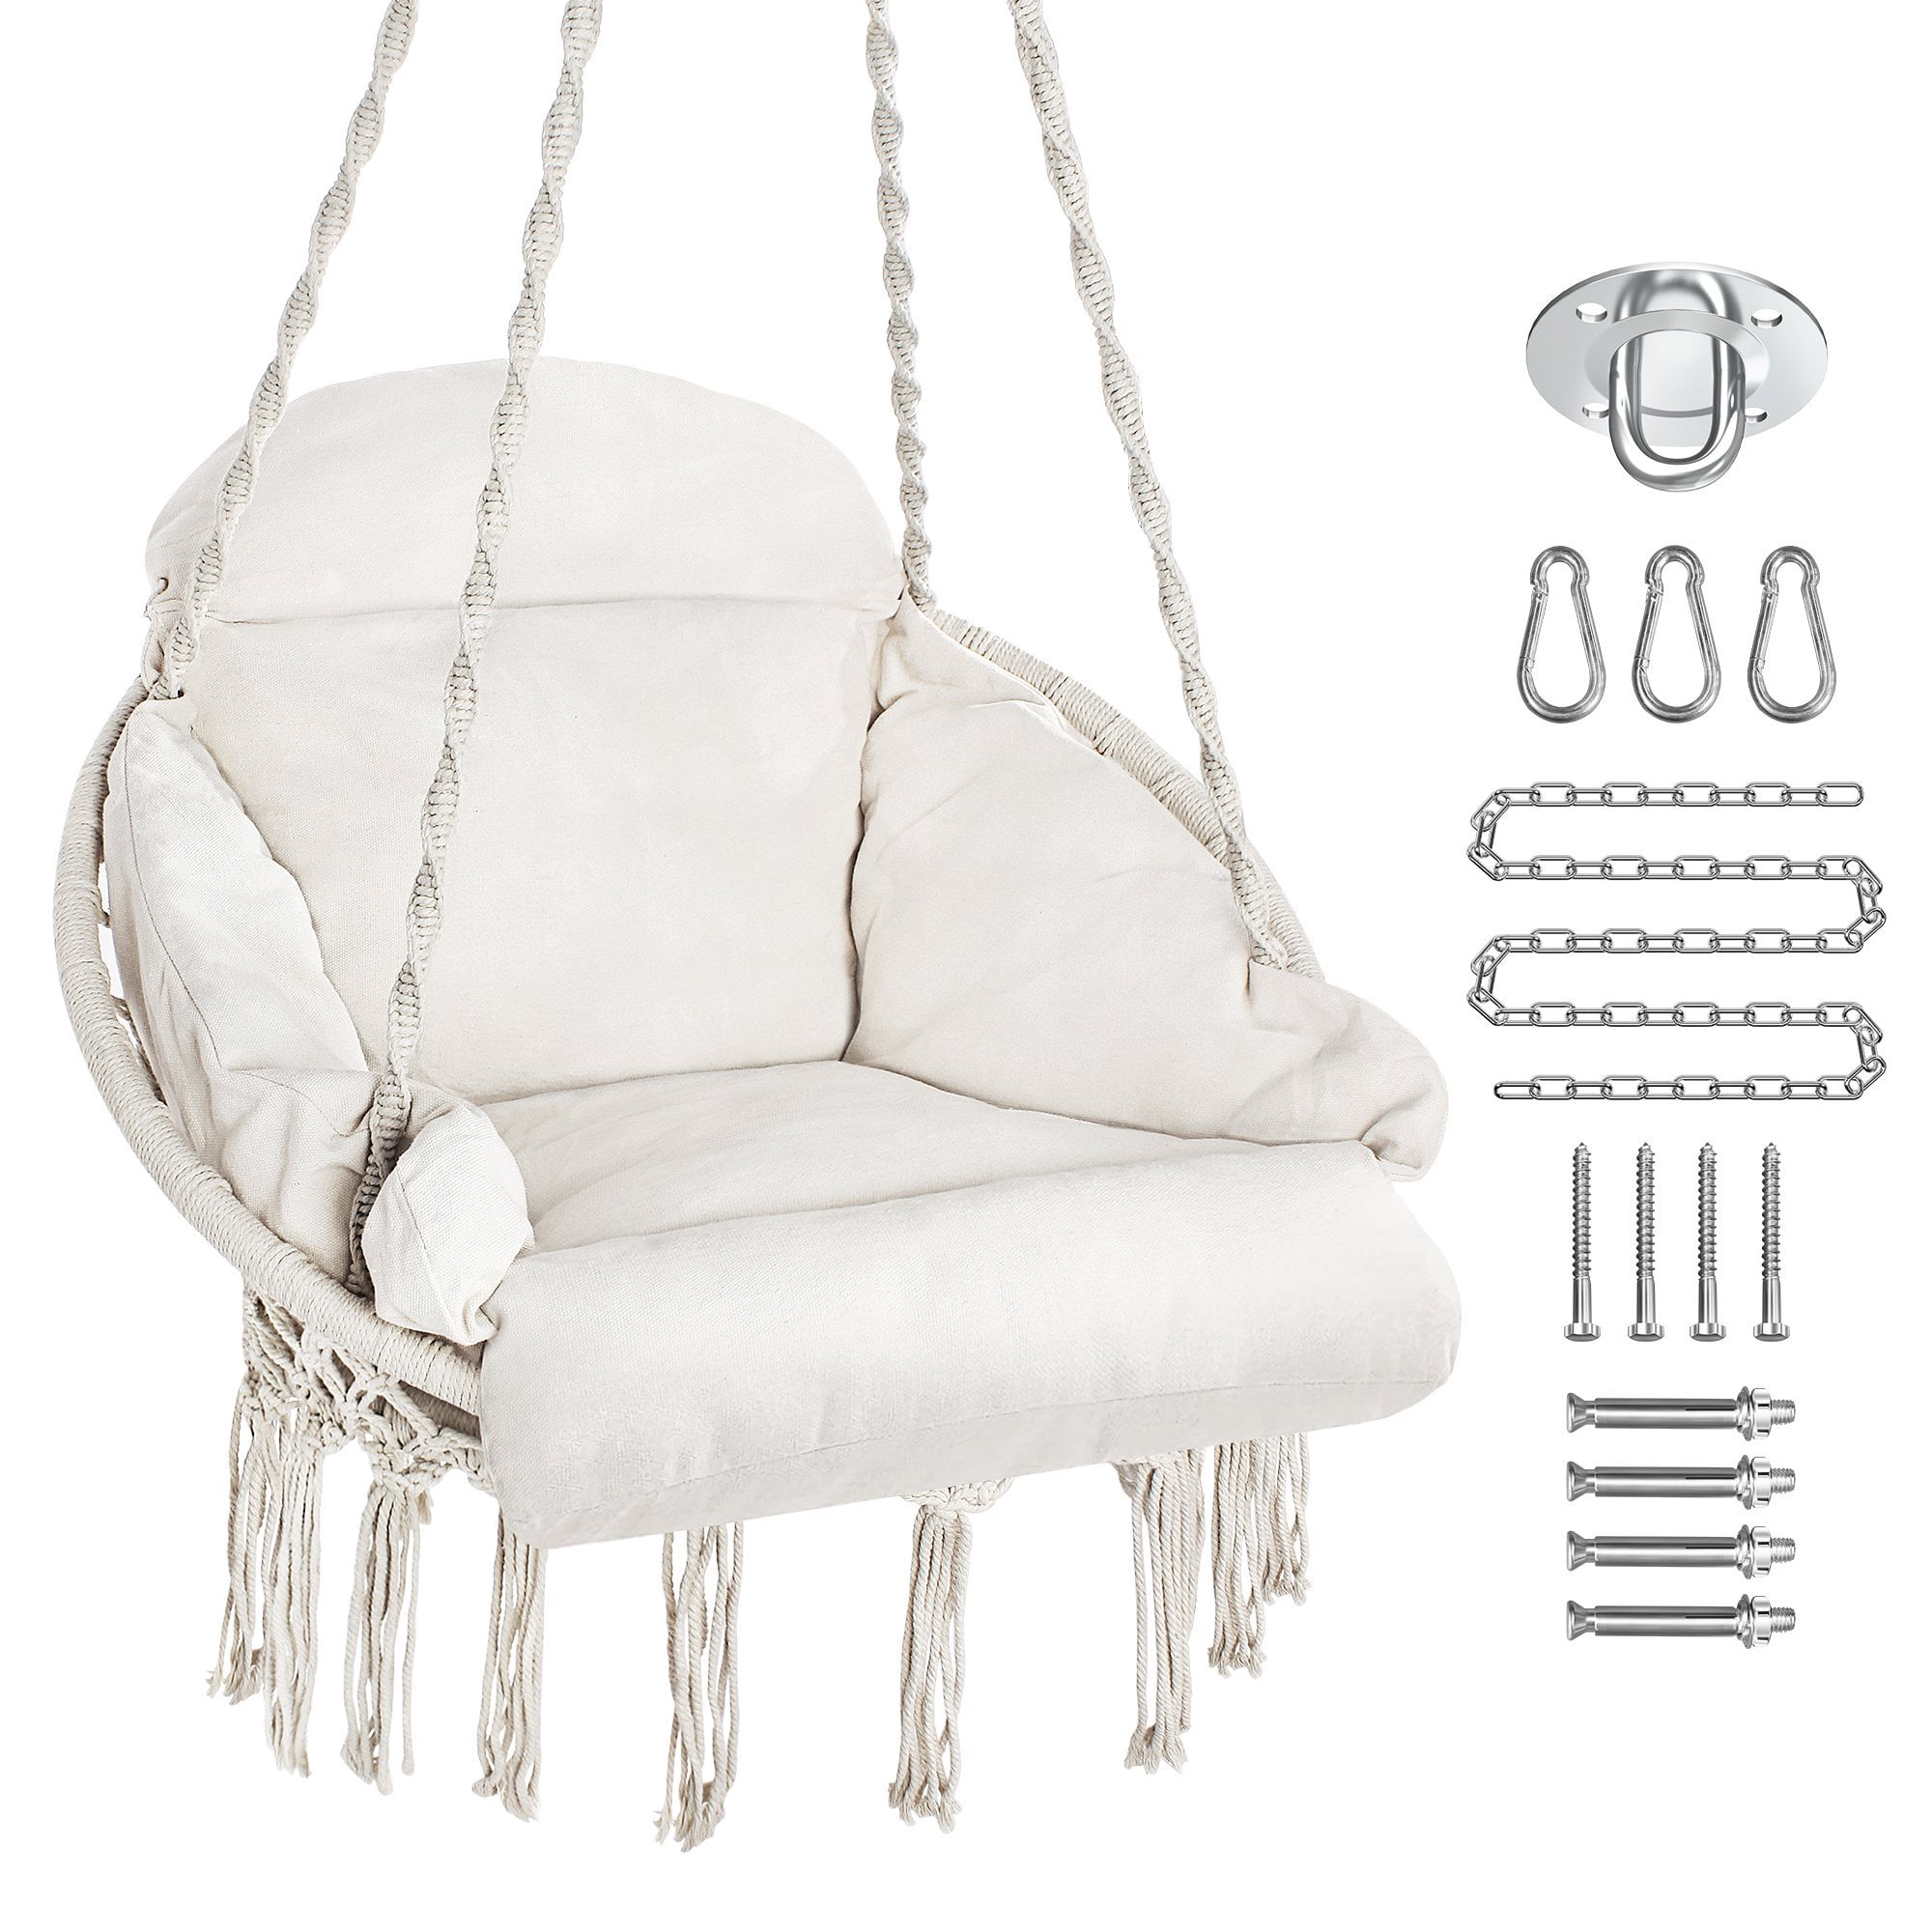 Details about   330lbs Hanging Hammock Chair Swing Cotton Rope Round Macrame Indoor Outdoor USA 